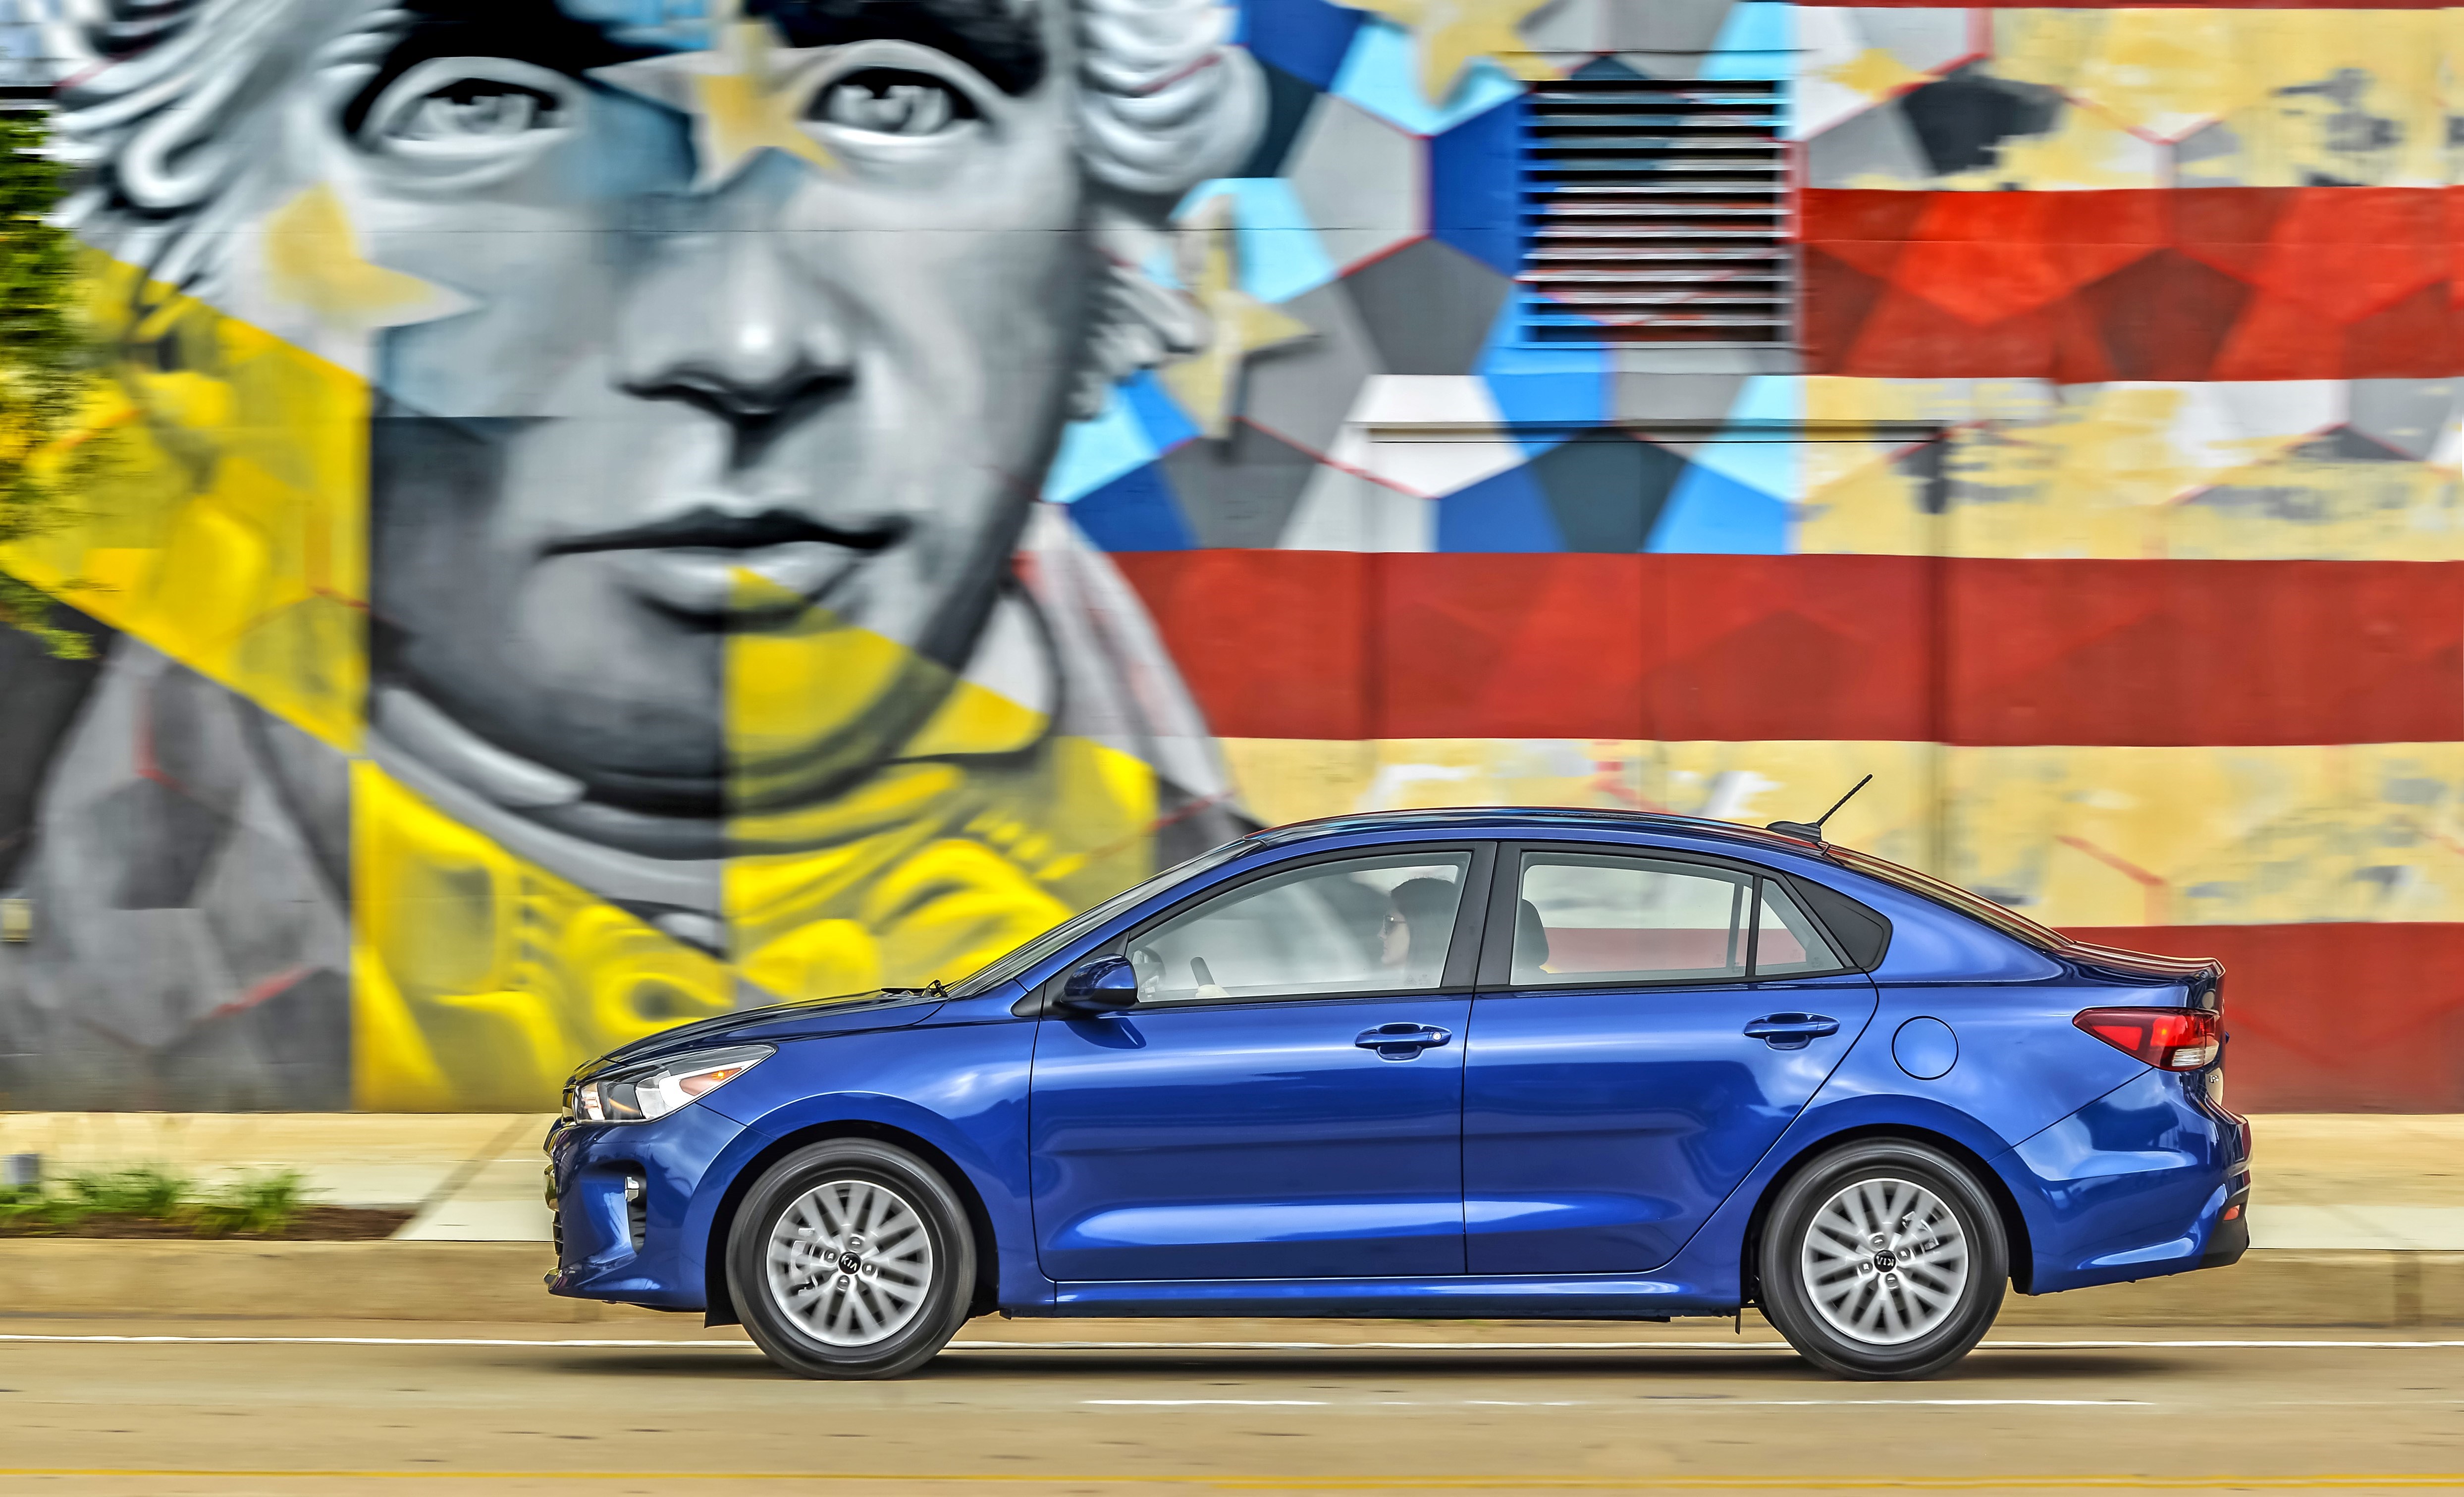 2018 Kia Rio: The Little Kia That Can, And Does